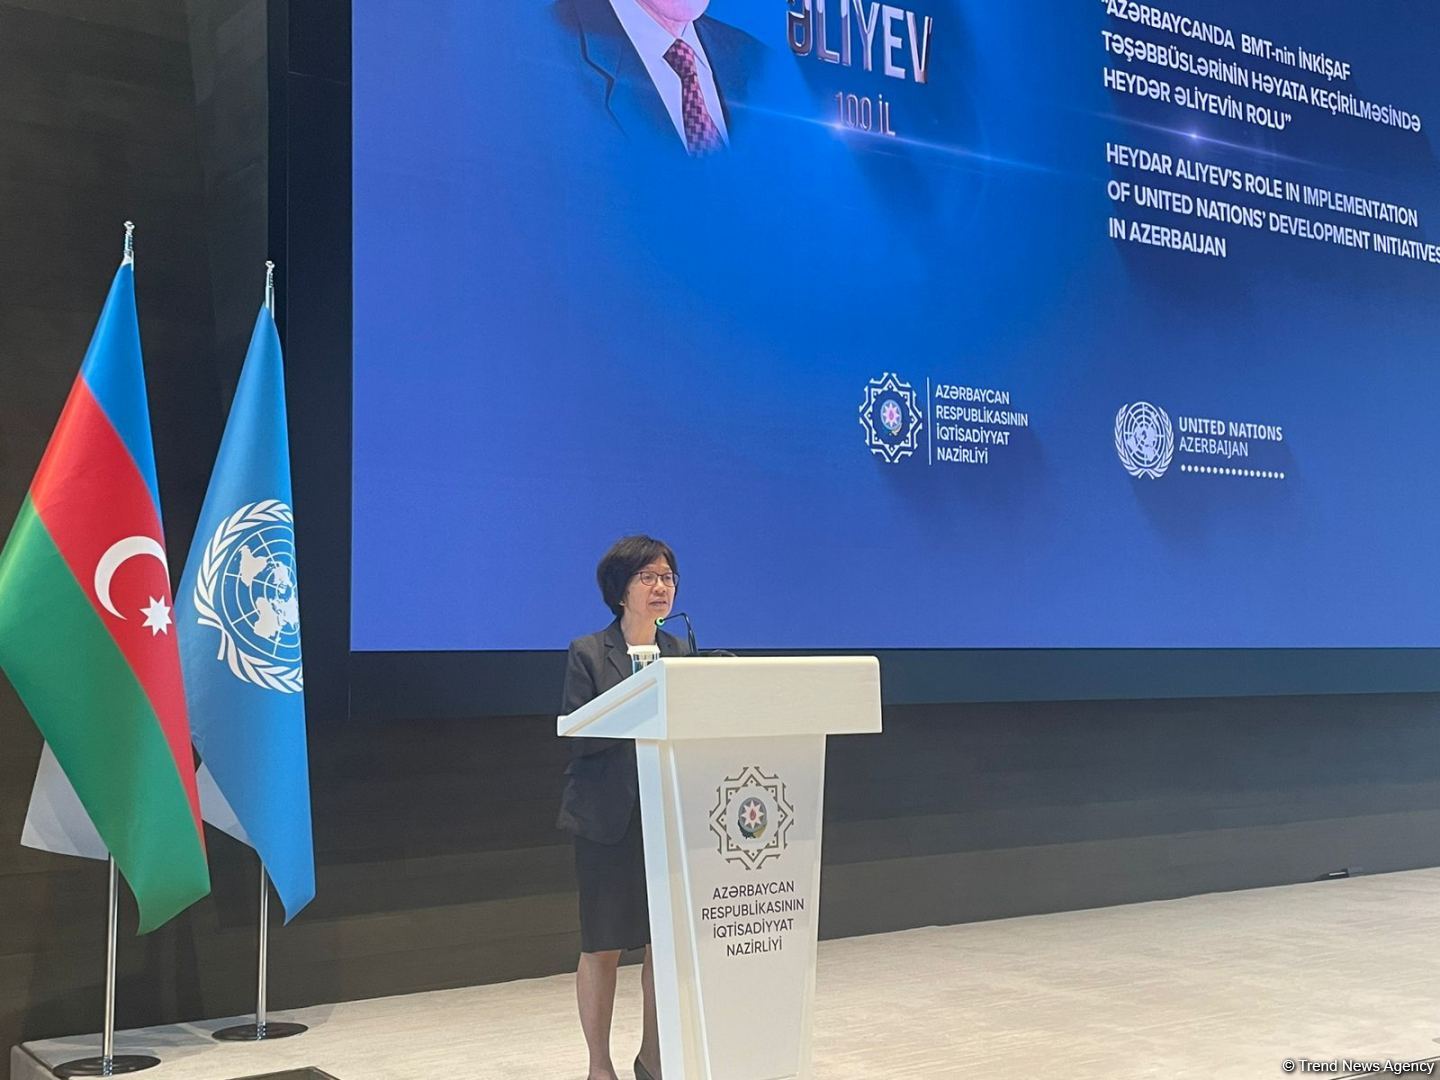 Heydar Aliyev made huge contribution to establishment of Azerbaijan's cooperation with UN - country rep